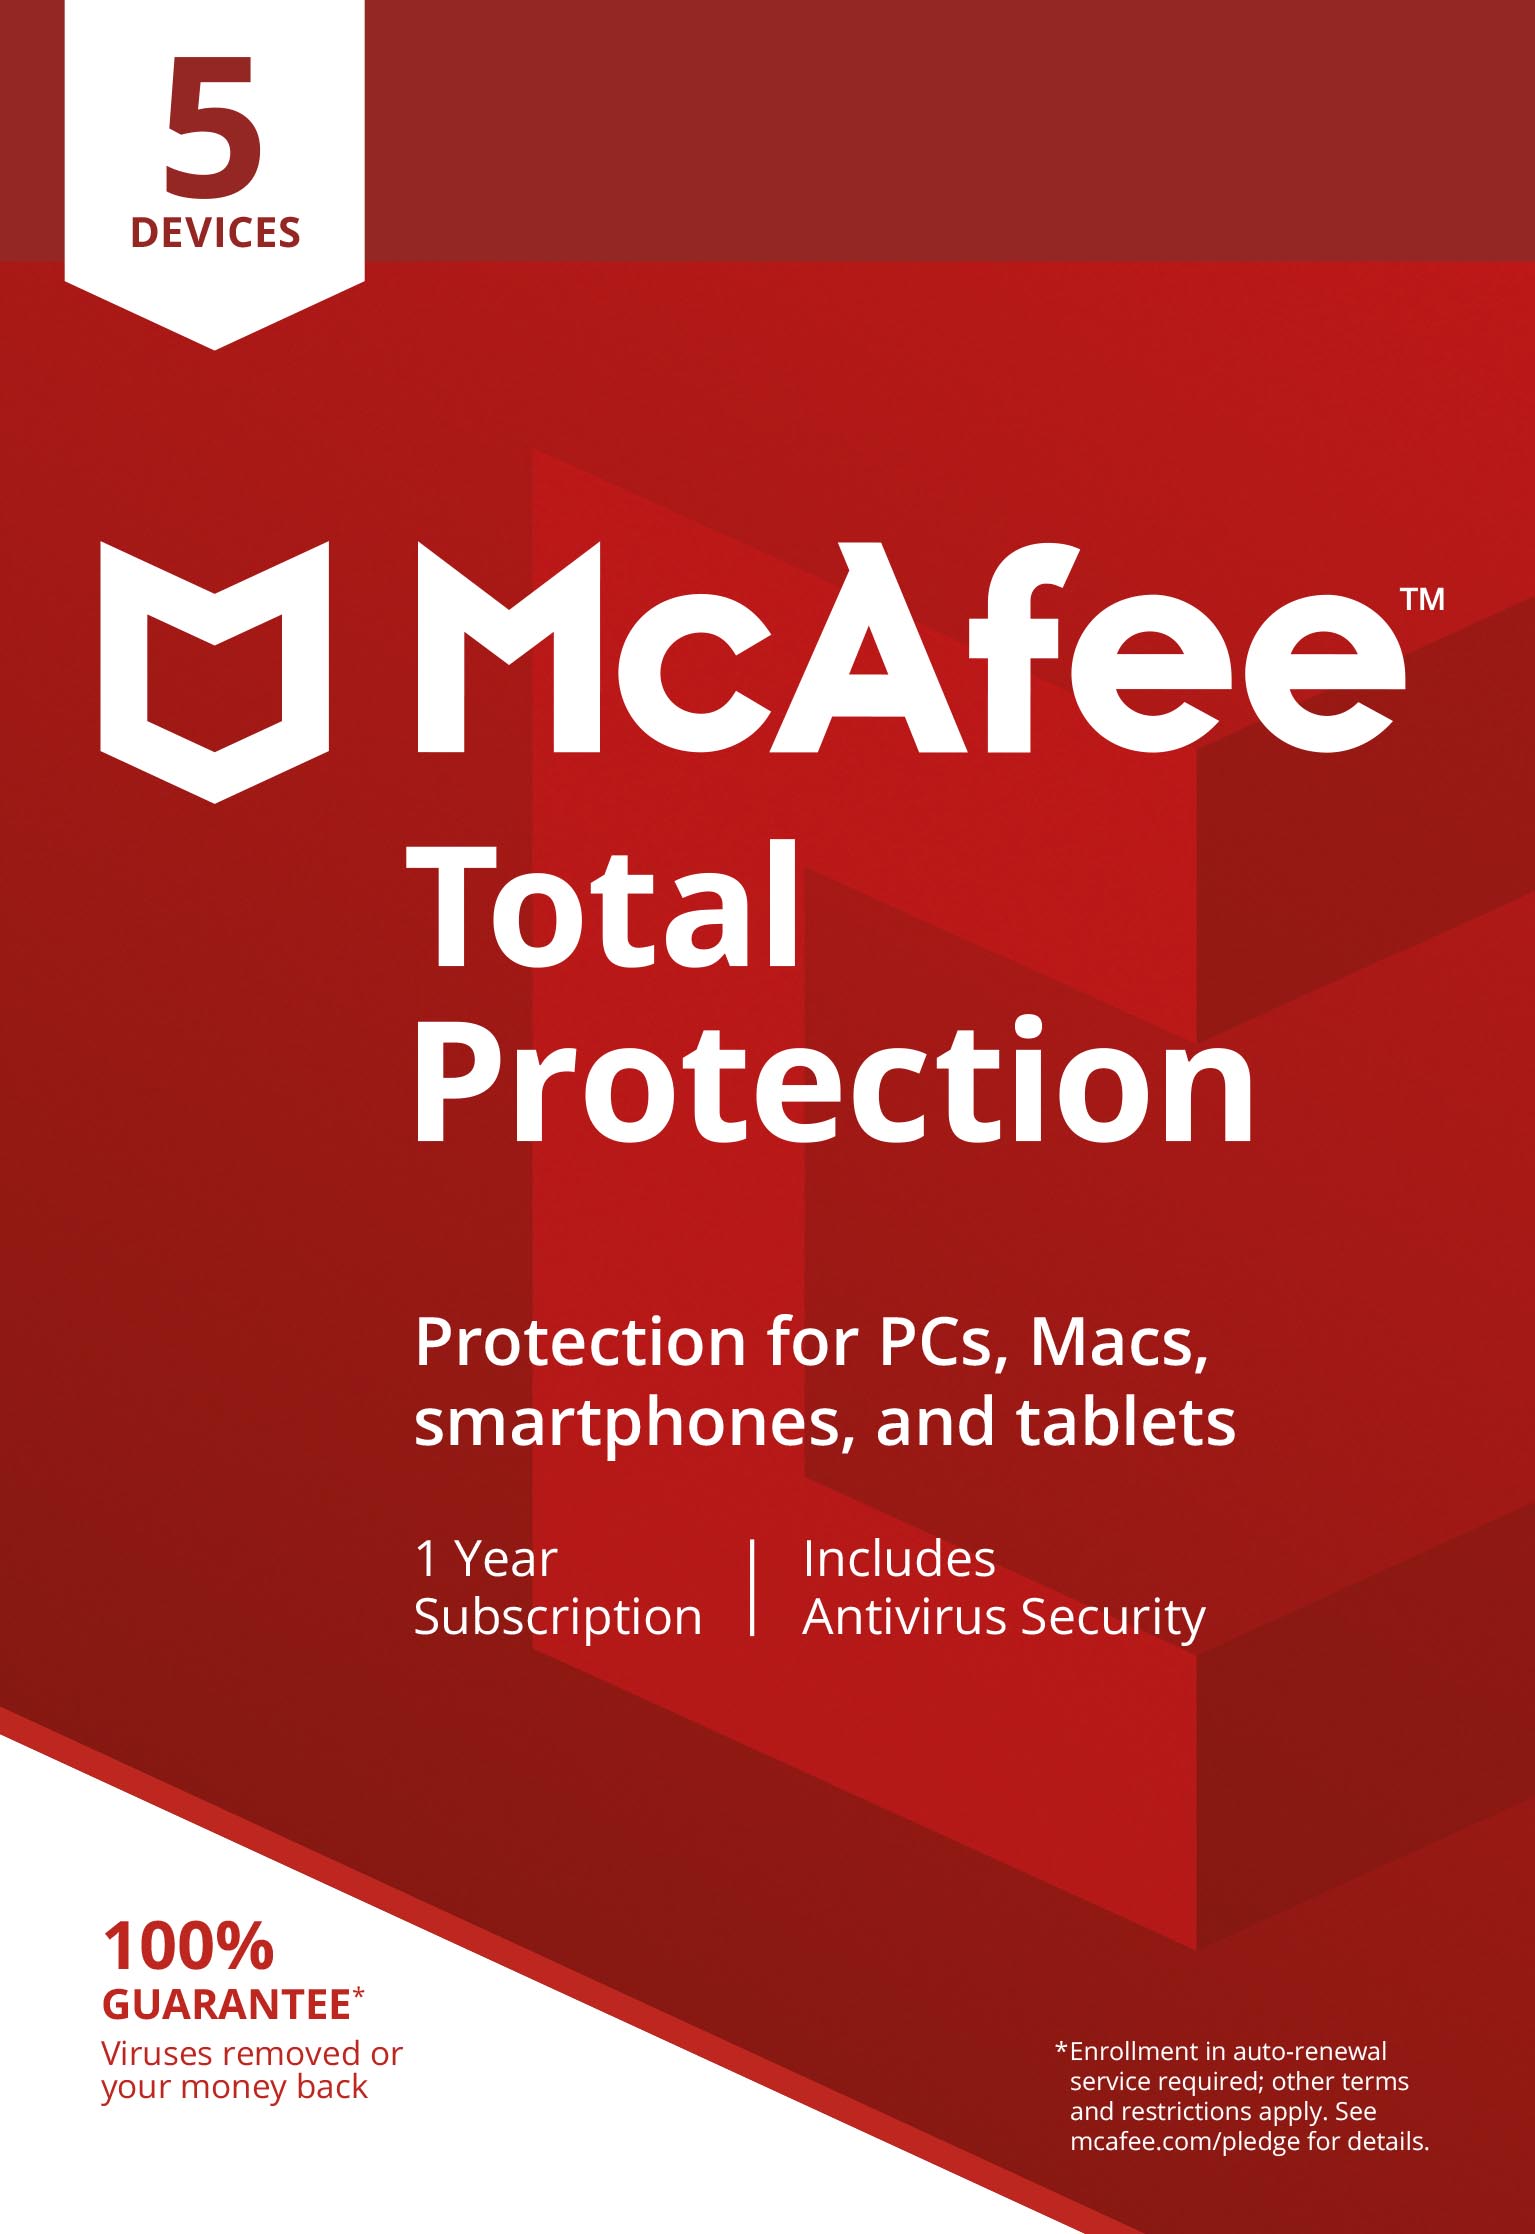 McAfee Total Protection 5 devices